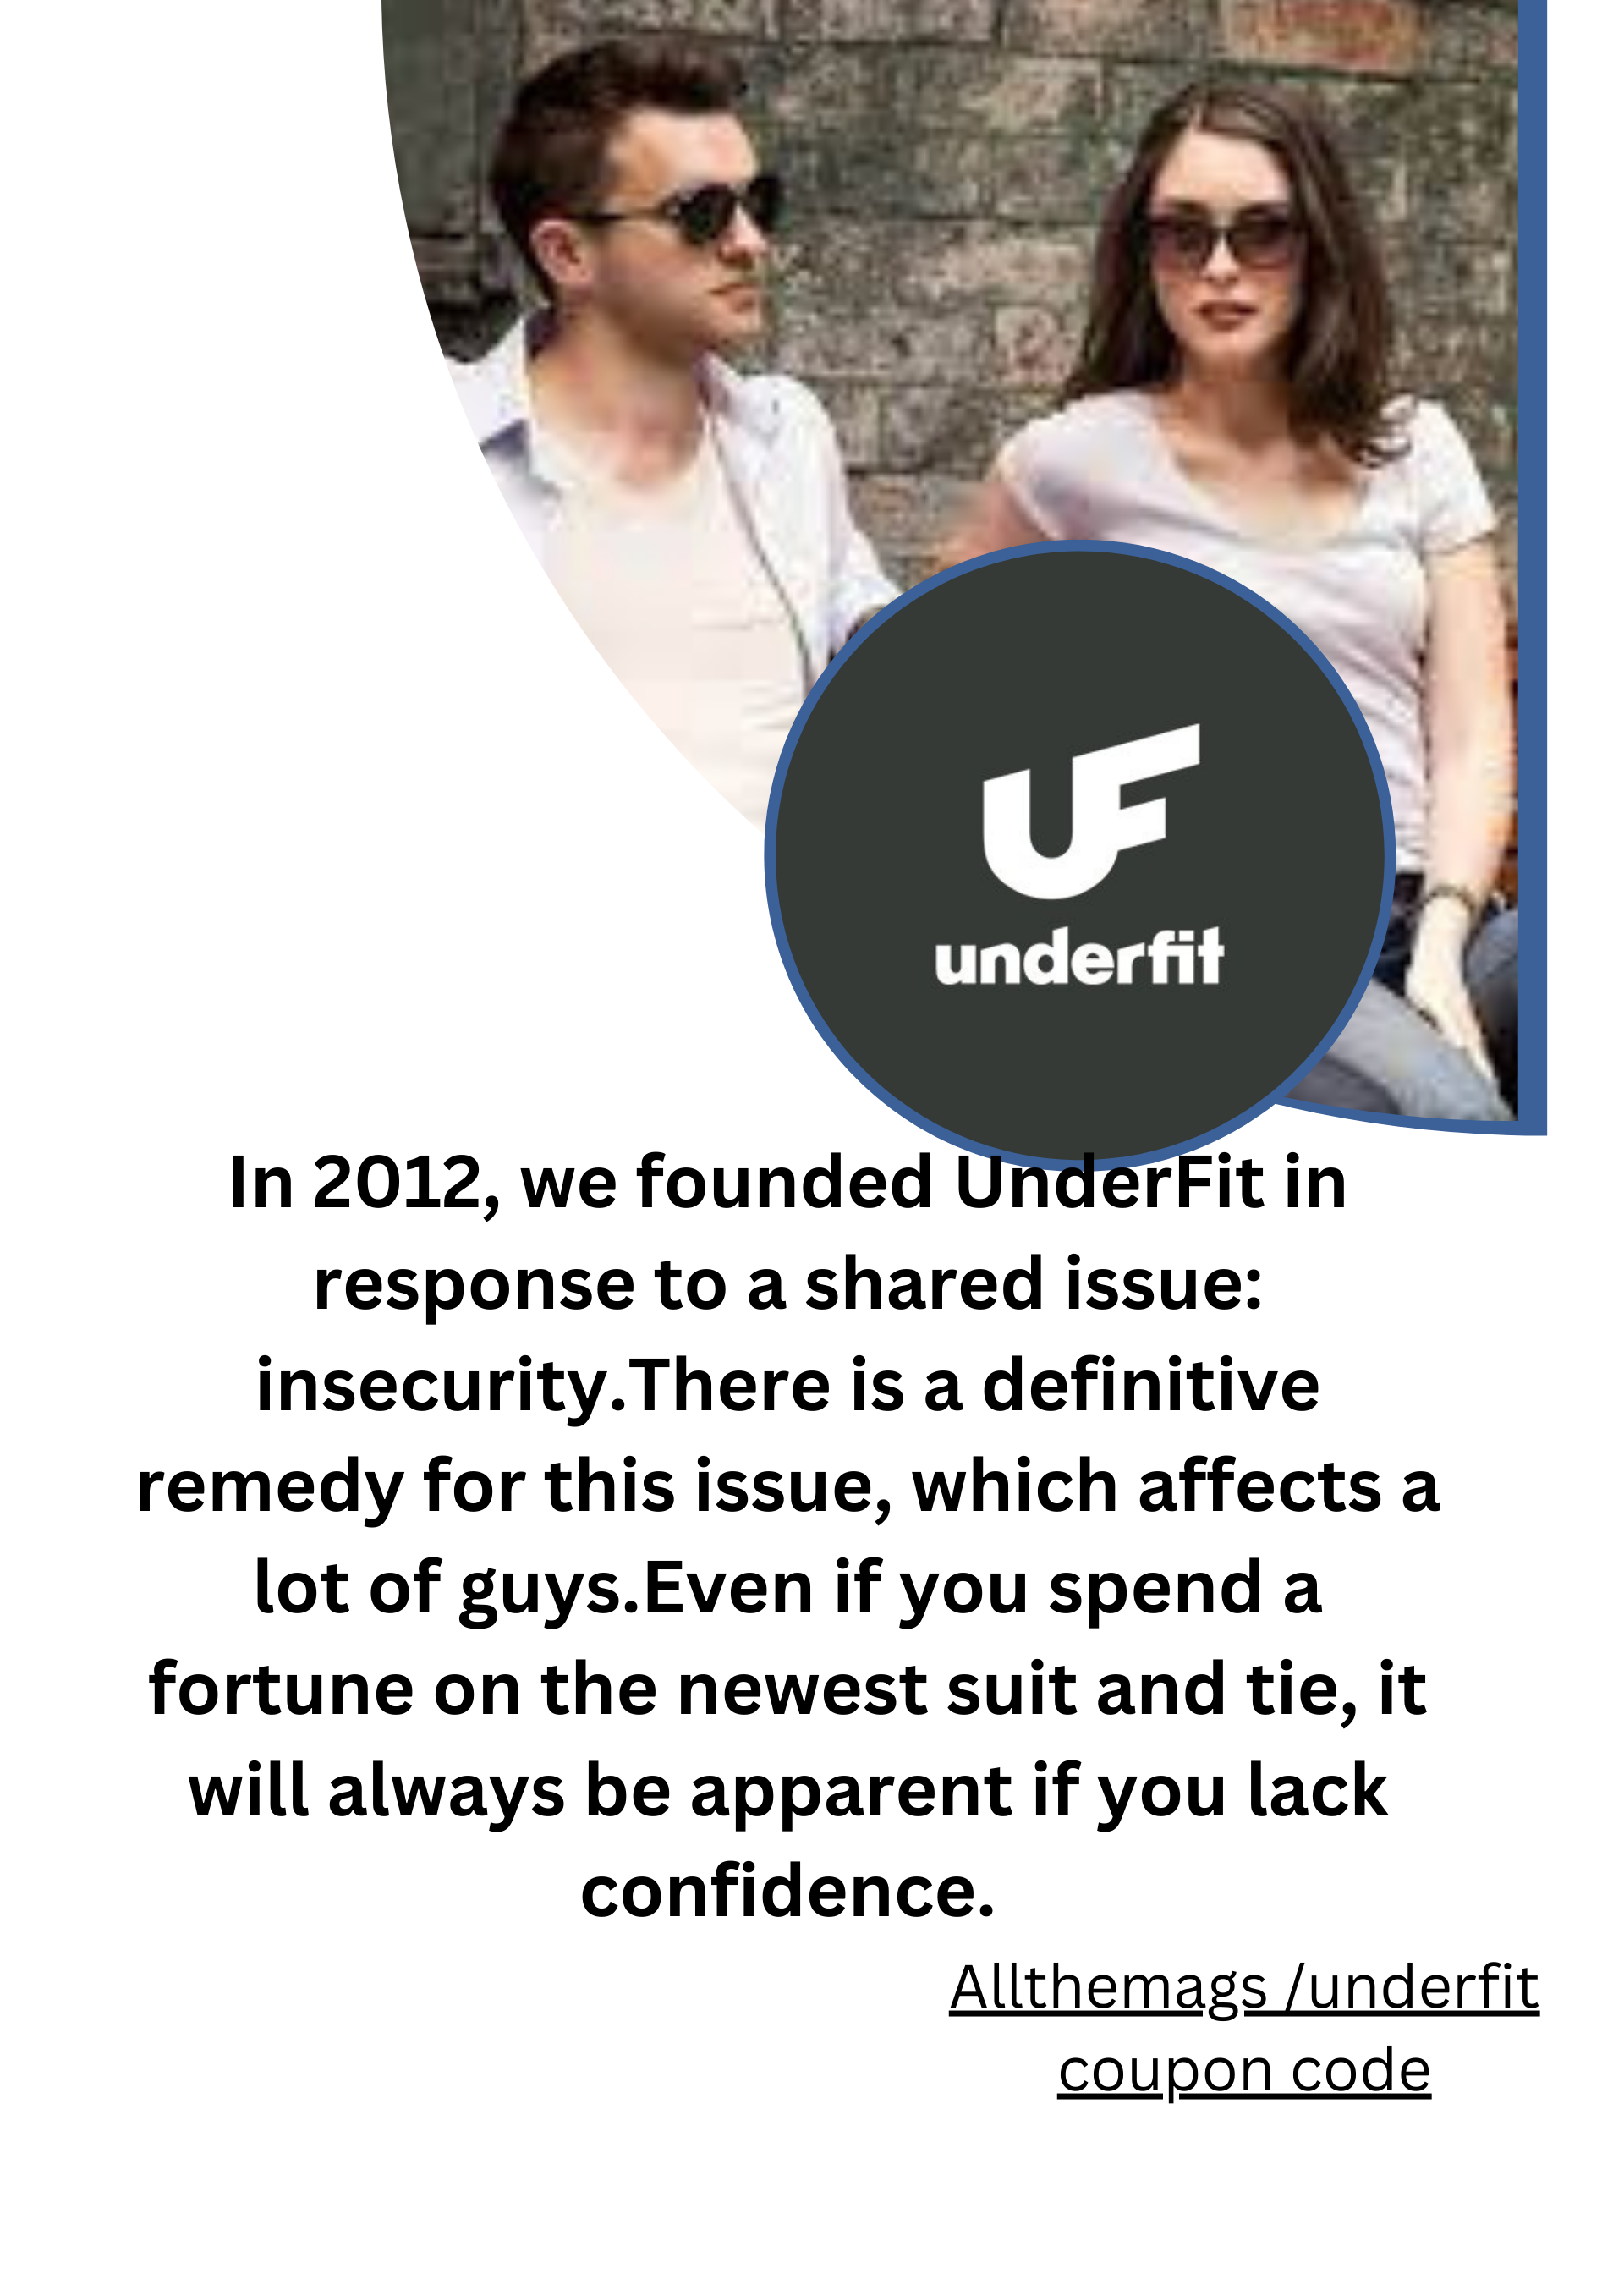 underfit

 

In 2012, we founded UnderFit in
response to a shared issue:
insecurity.There is a definitive
remedy for this issue, which affects a
lot of guys.Even if you spend a
fortune on the newest suit and tie, it
will always be apparent if you lack
confidence.

Allthemags /underfit
coupon code